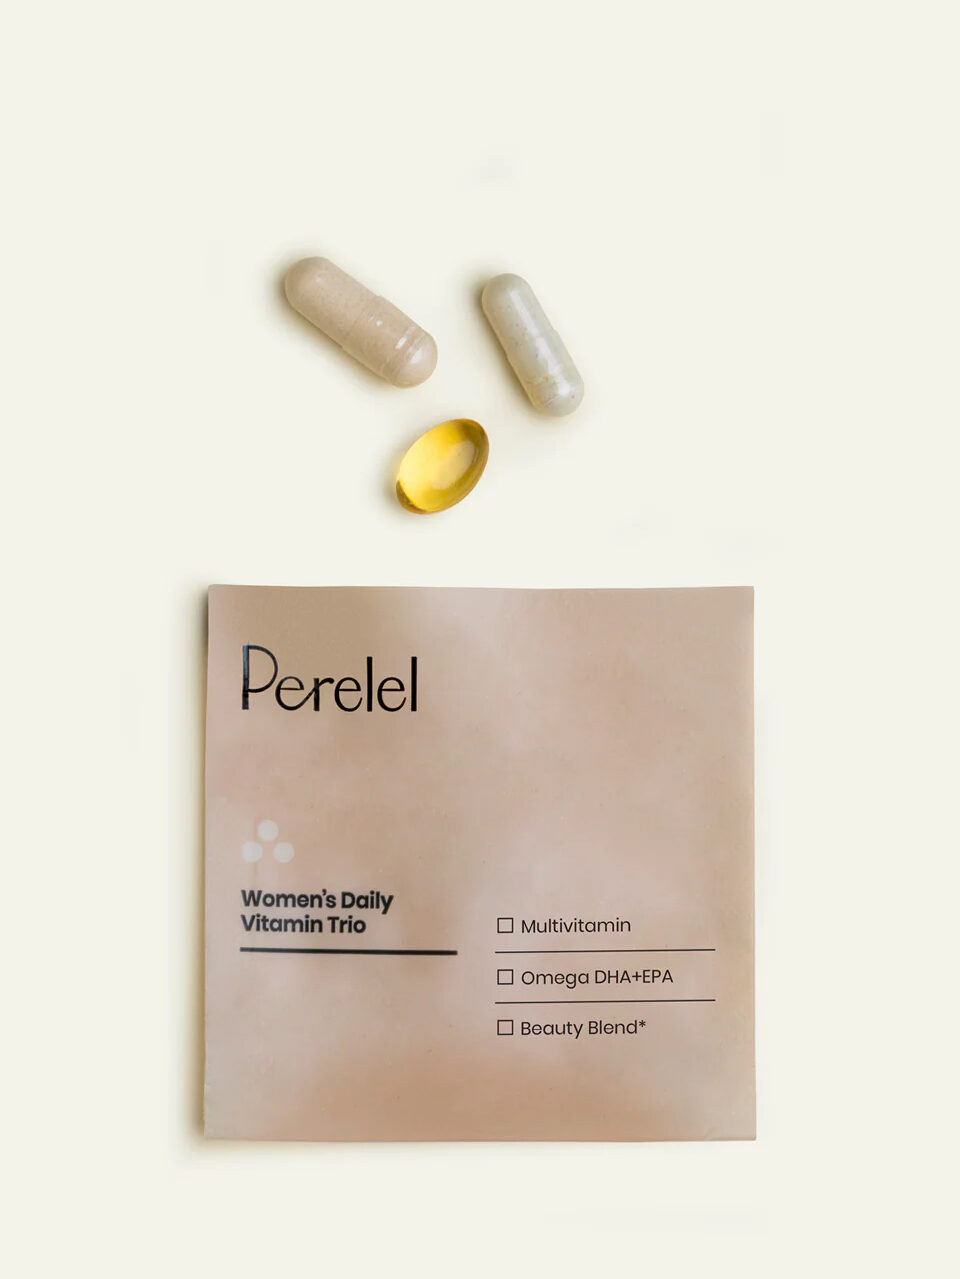 A daily pack of Perelel Women's Daily Vitamin Trio, with the three supplements shown above the packaging.